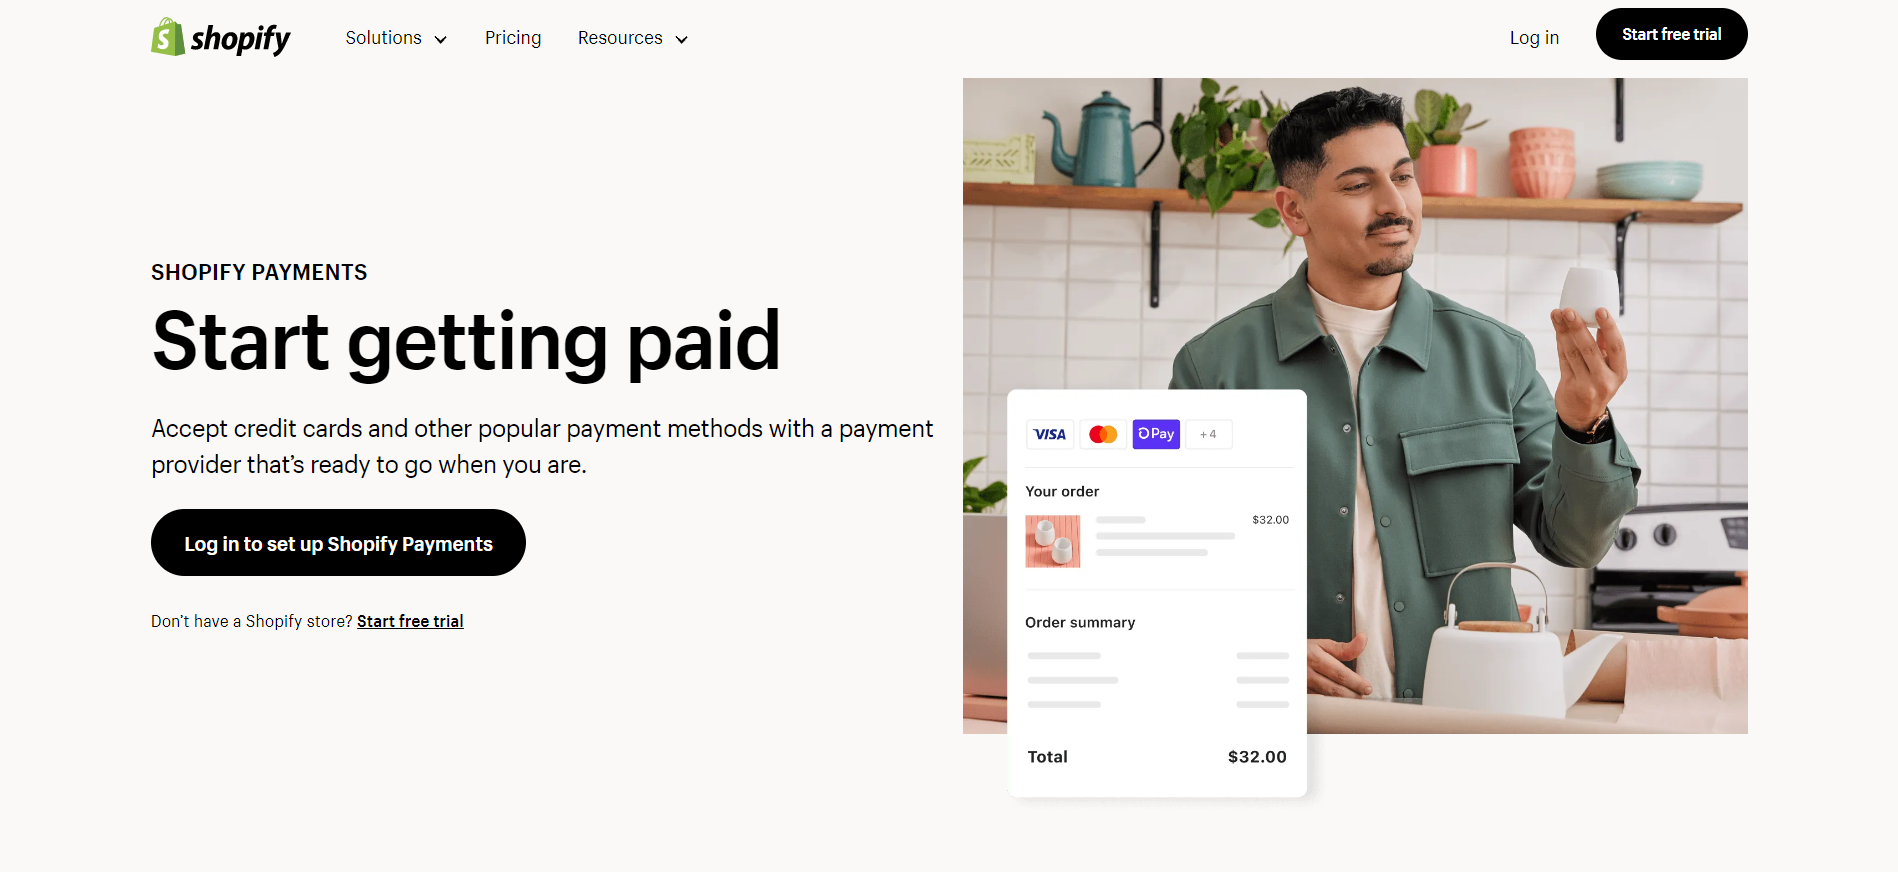 Shopify store payment methods: Shopify Payments